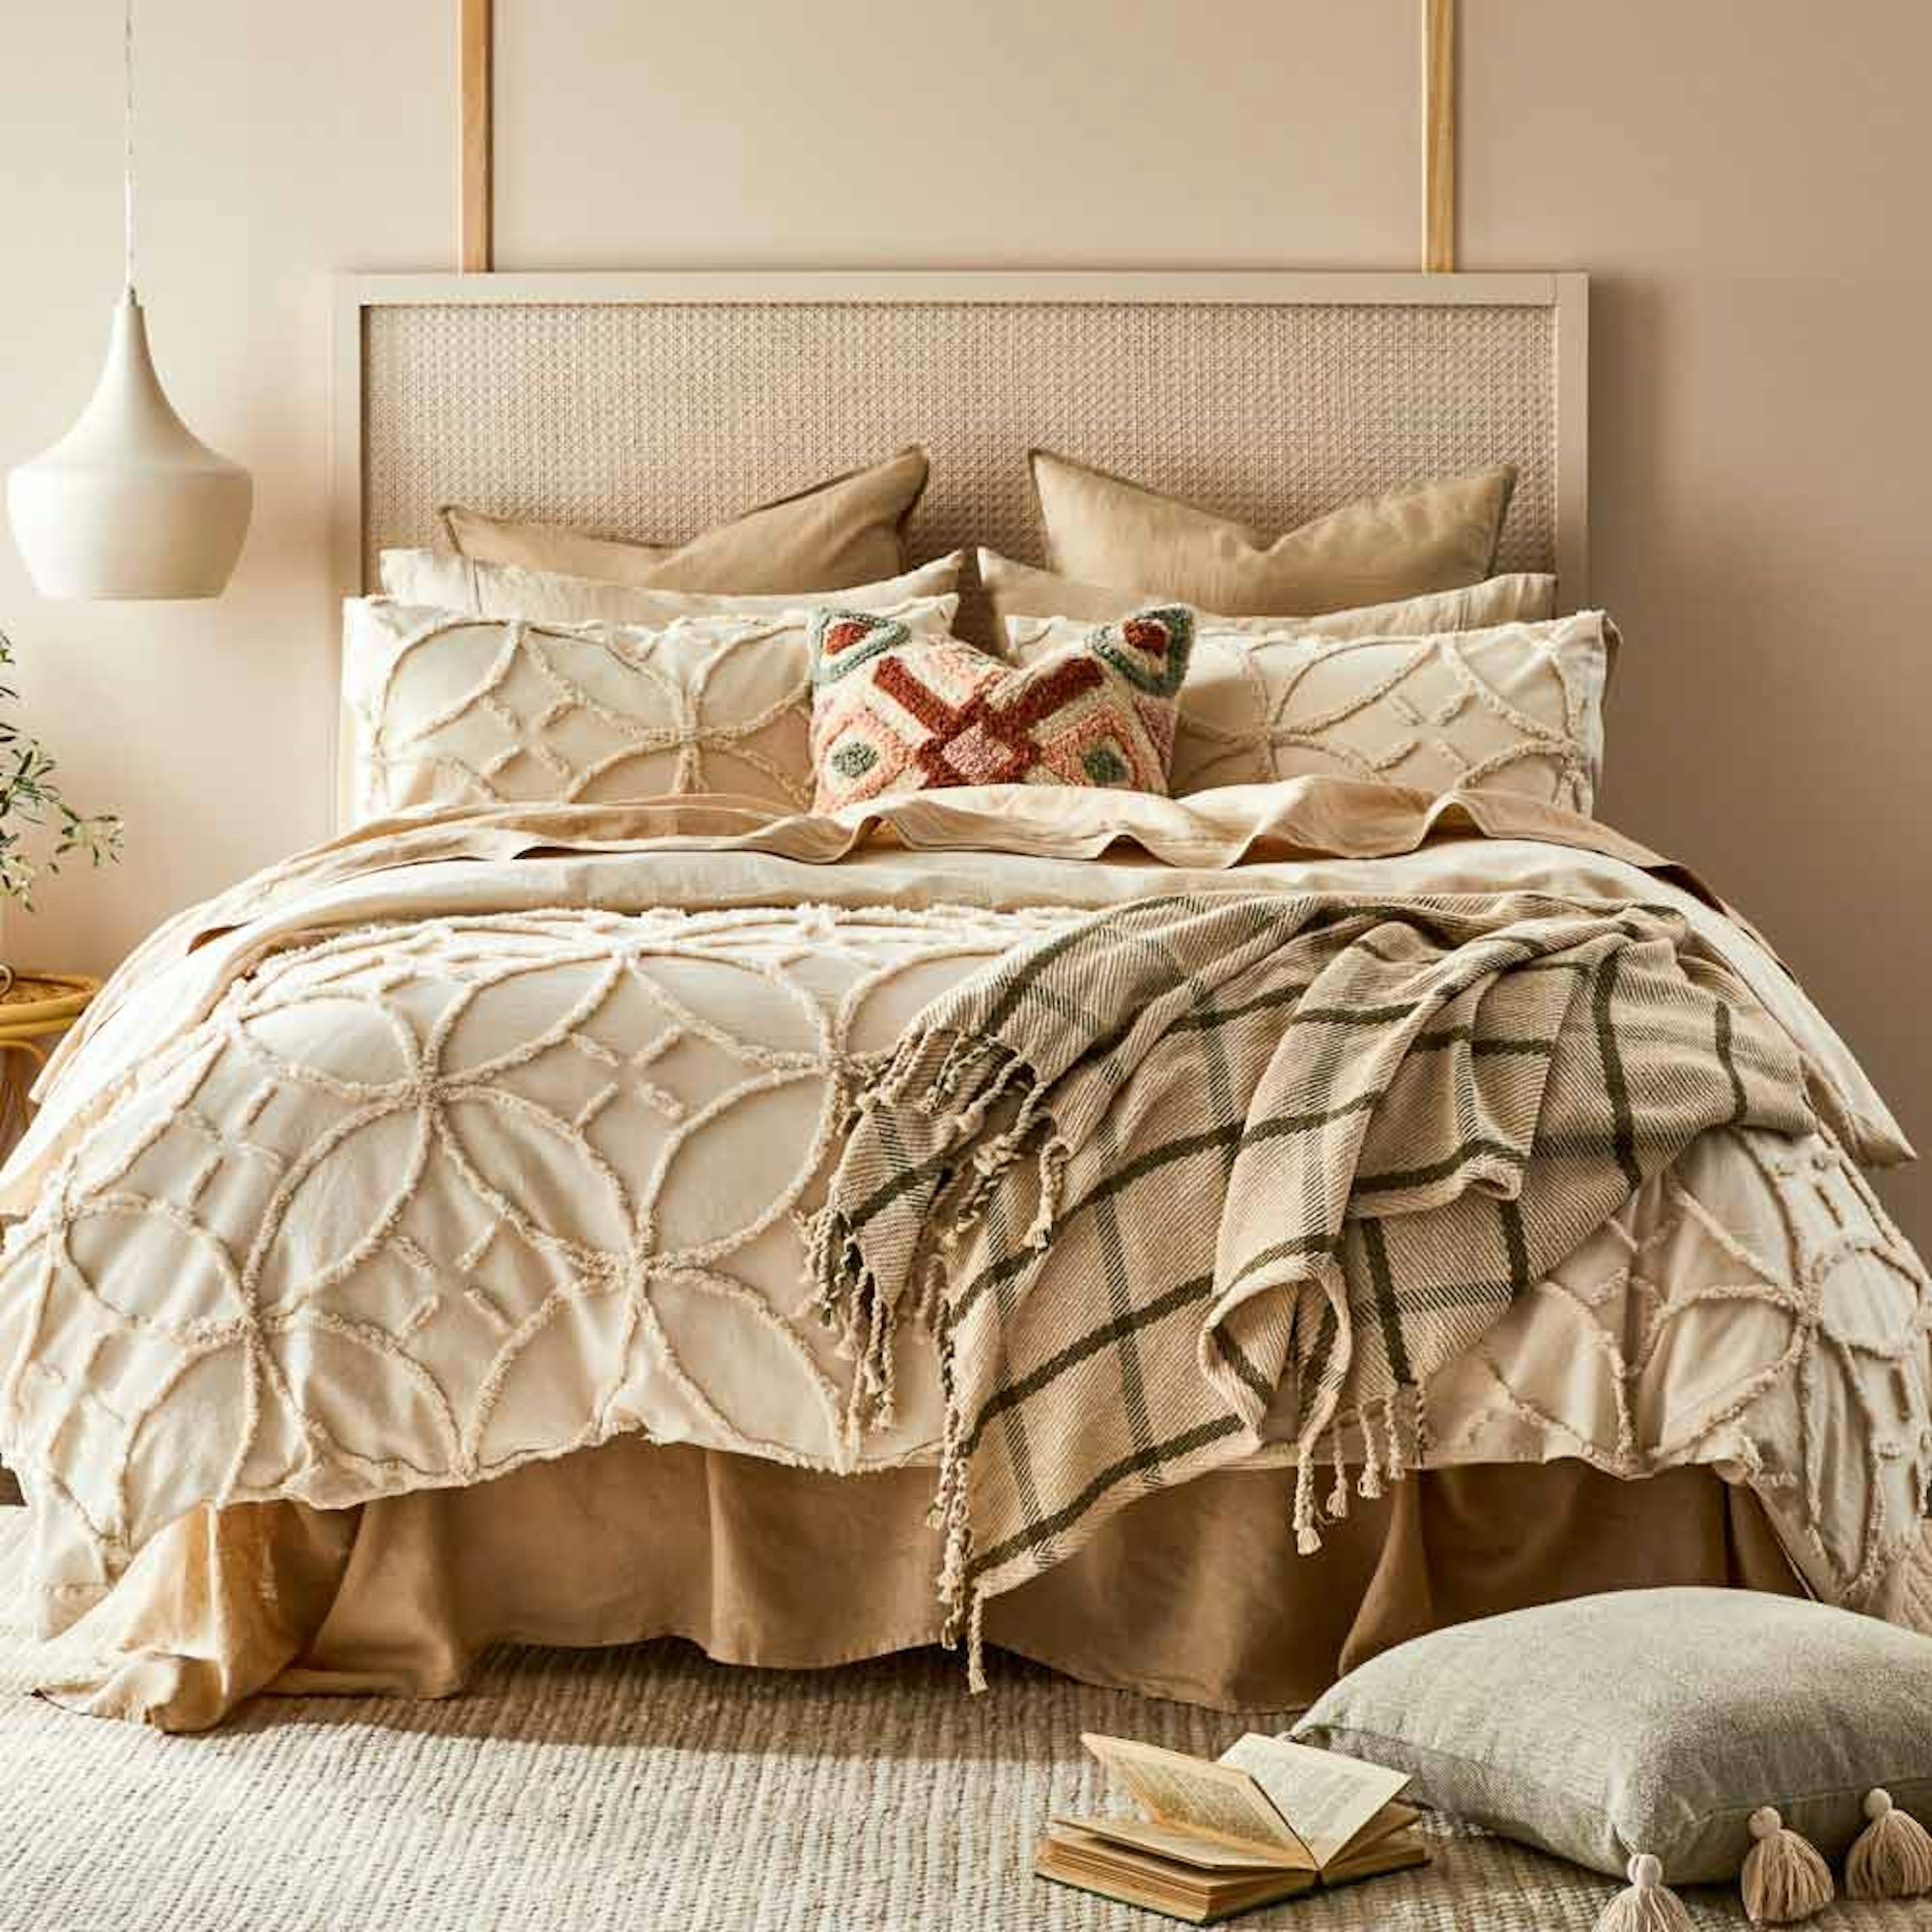 MyHouse Haidie Quilt Cover Set. Mother's Day gift guide. Bedroom setting with natural tones and tufted texture.